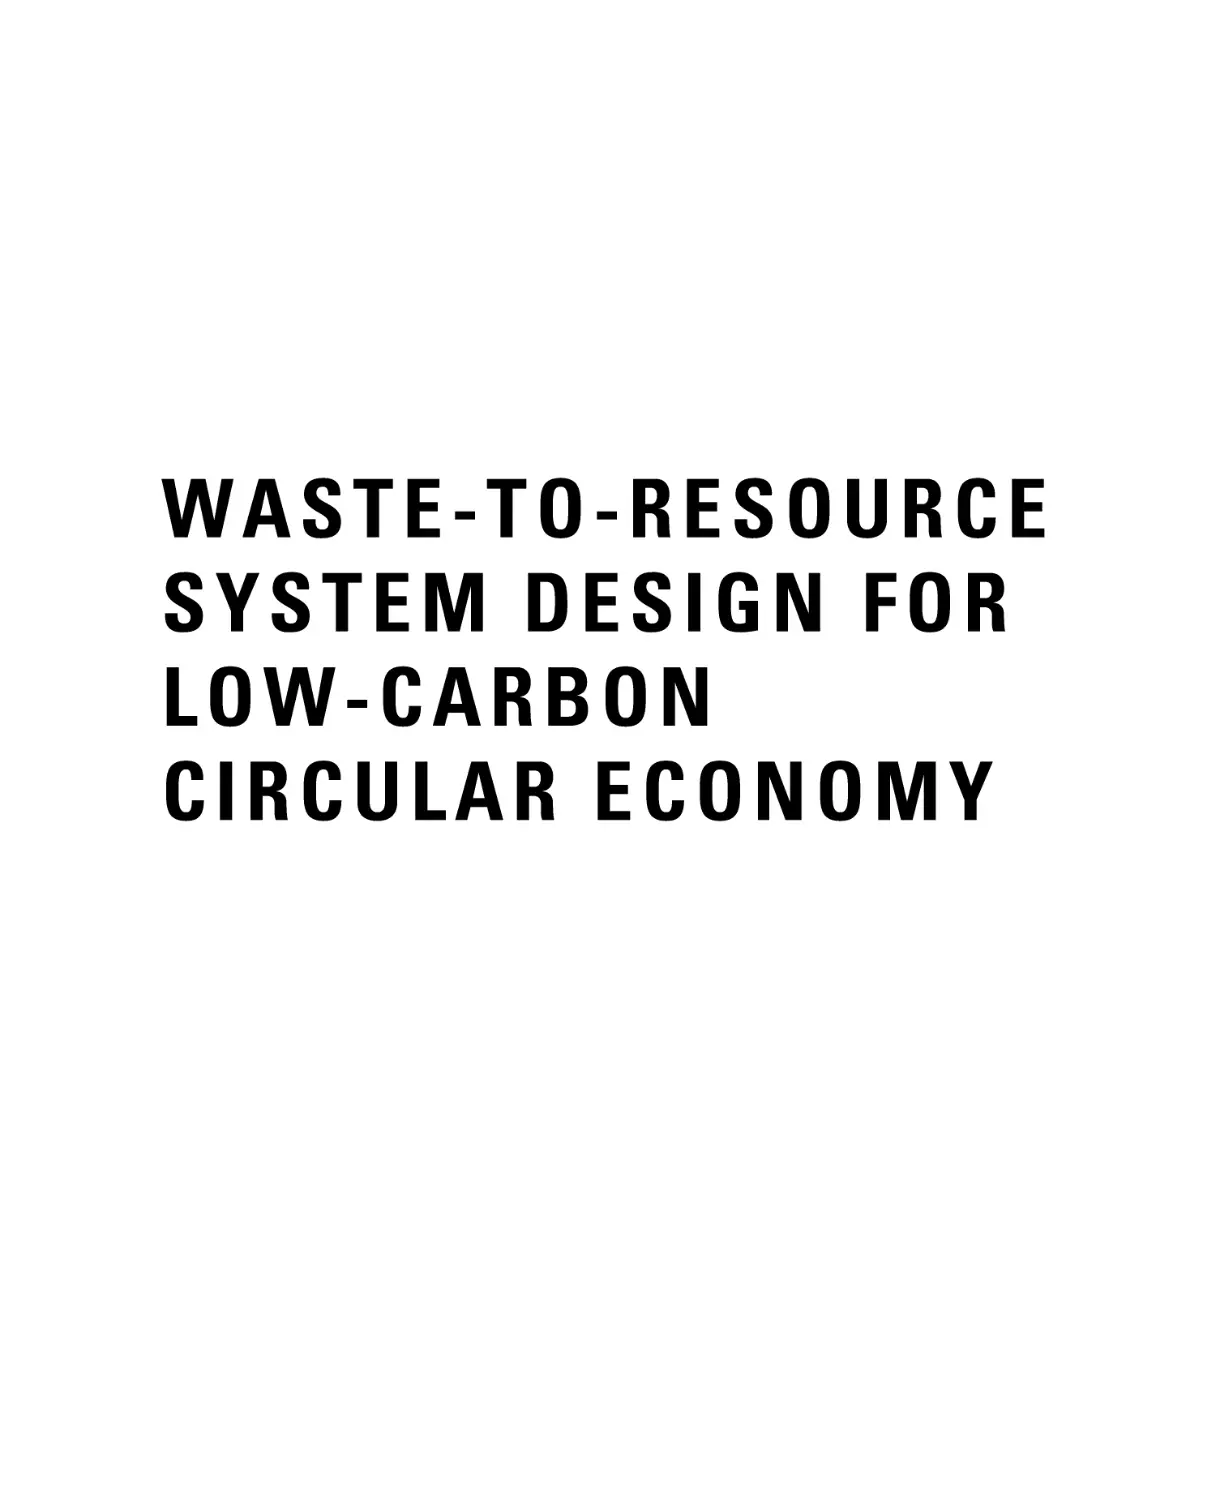 WASTE-TO-RESOURCE SYSTEM DESIGN FORLOW-CARBON CIRCULAR ECONOMY